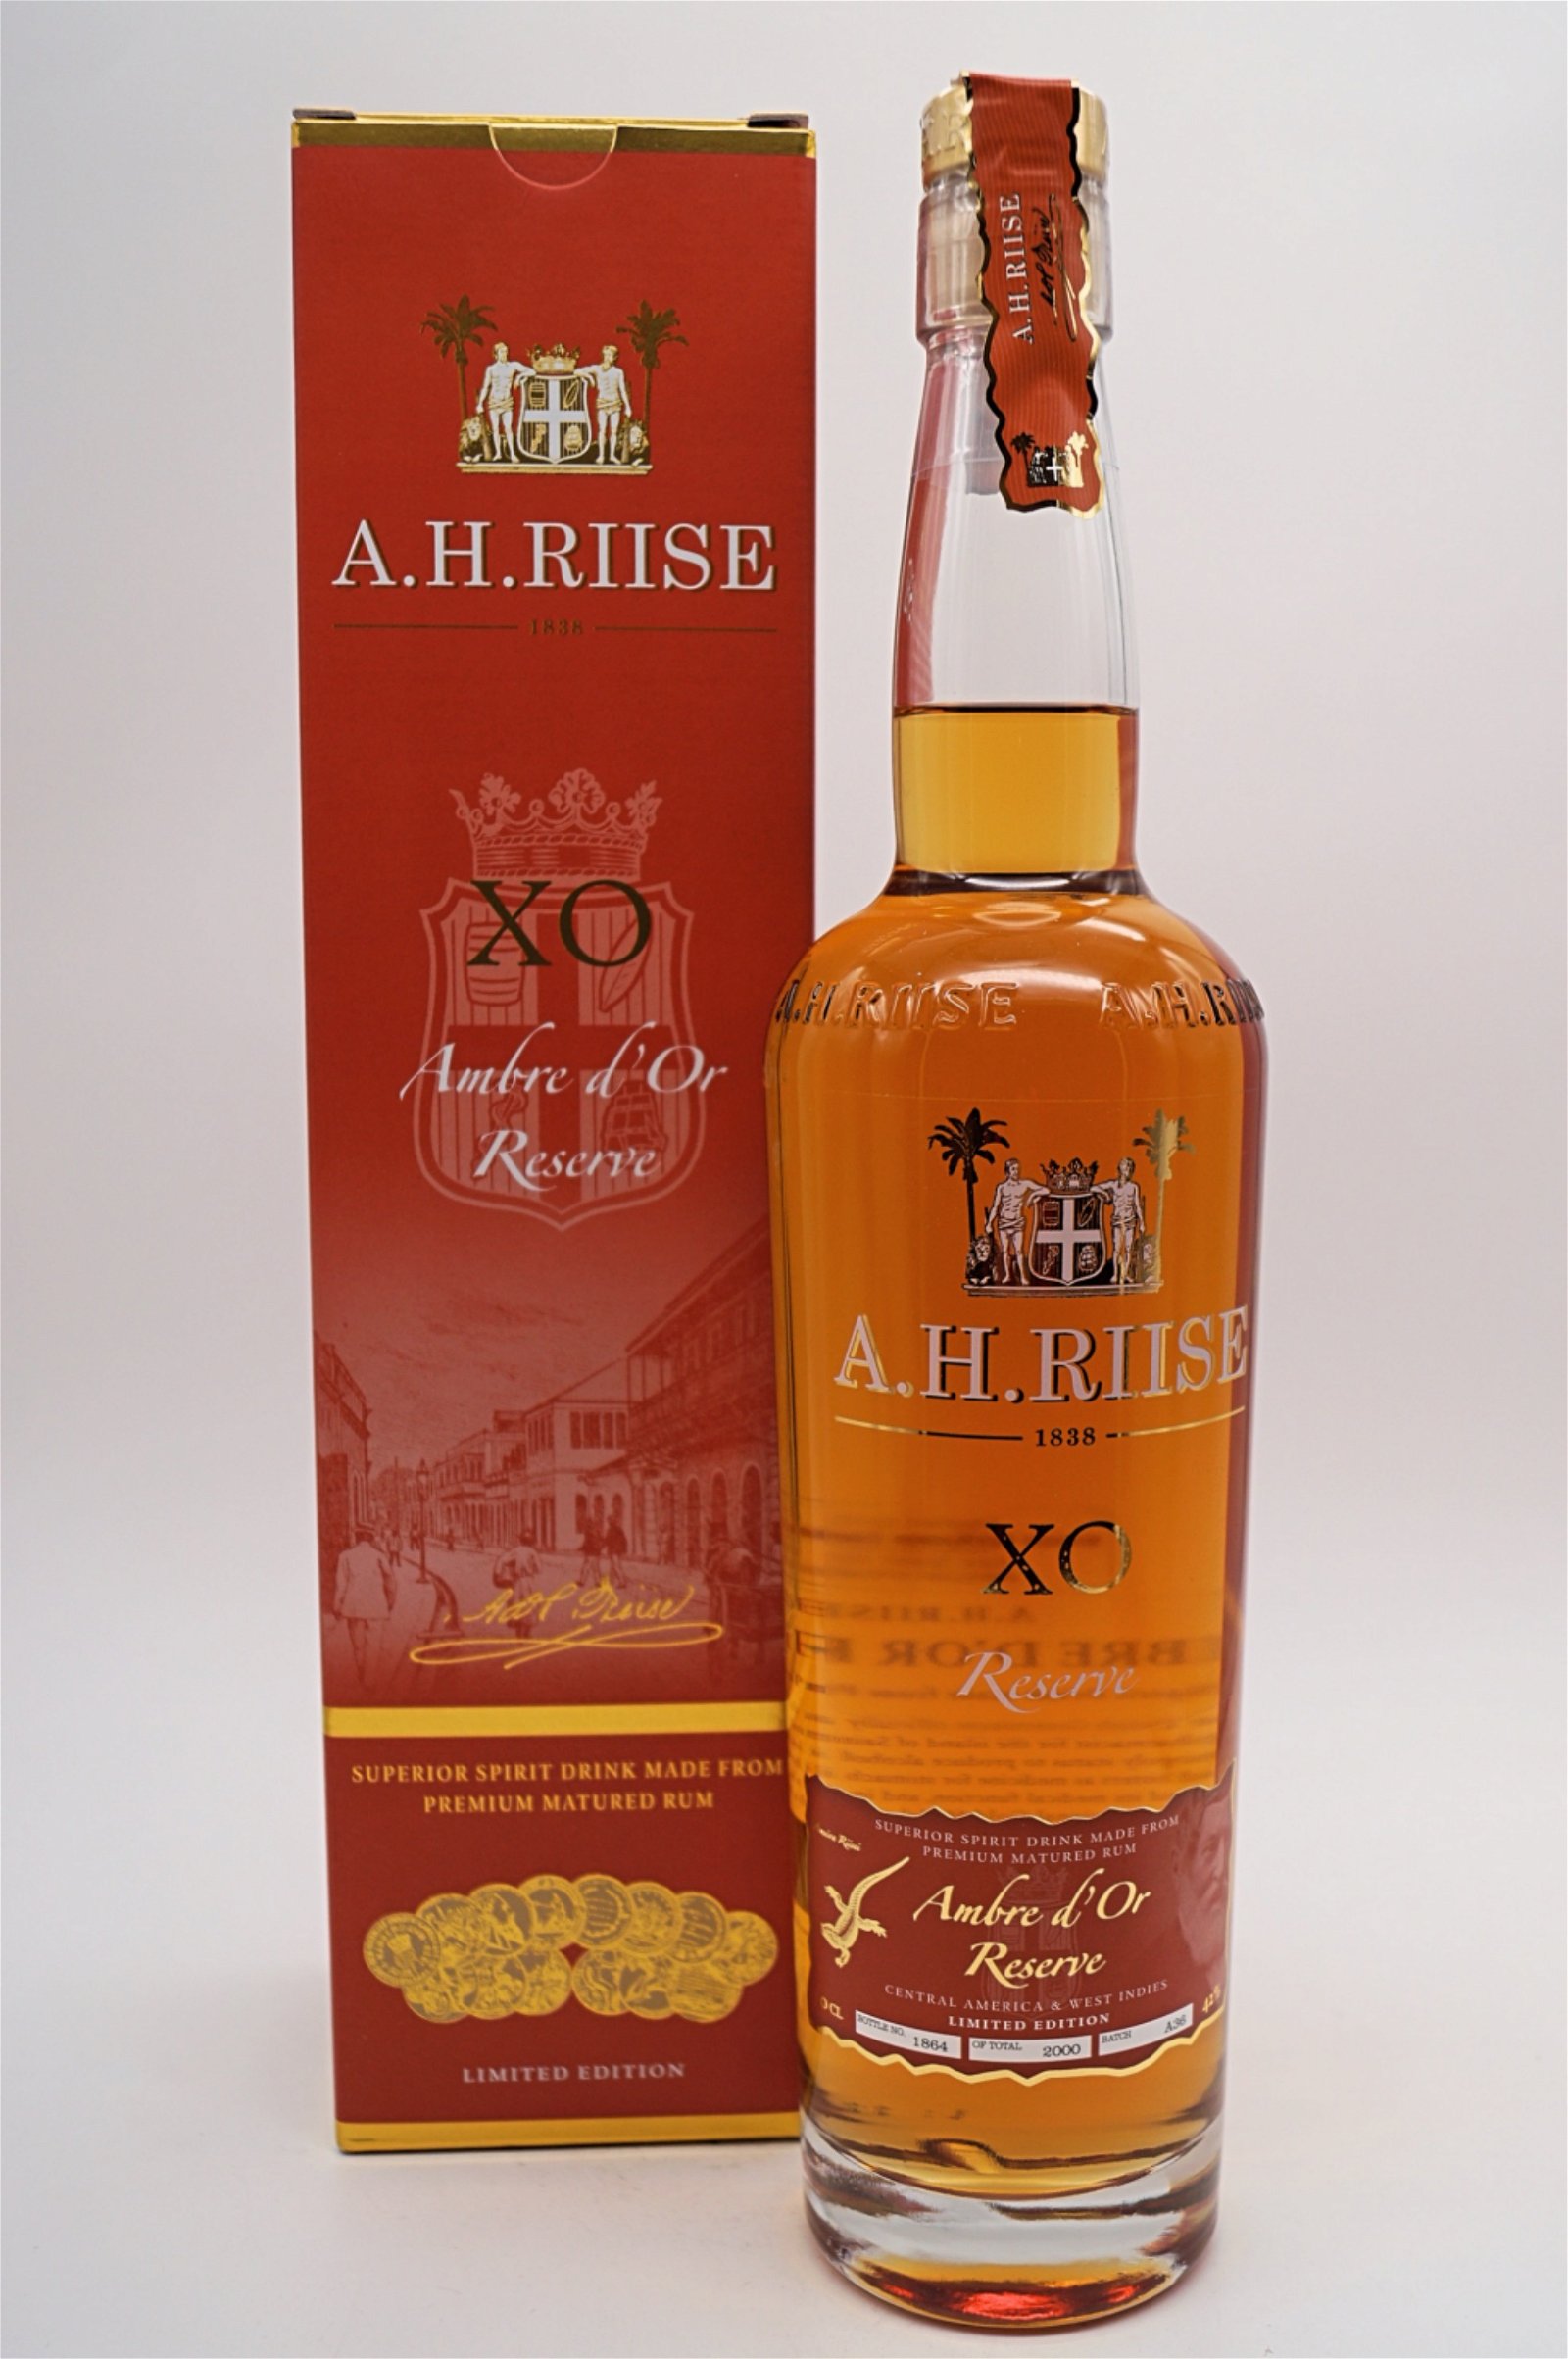 A.H.Riise XO Ambre d Or Reserve